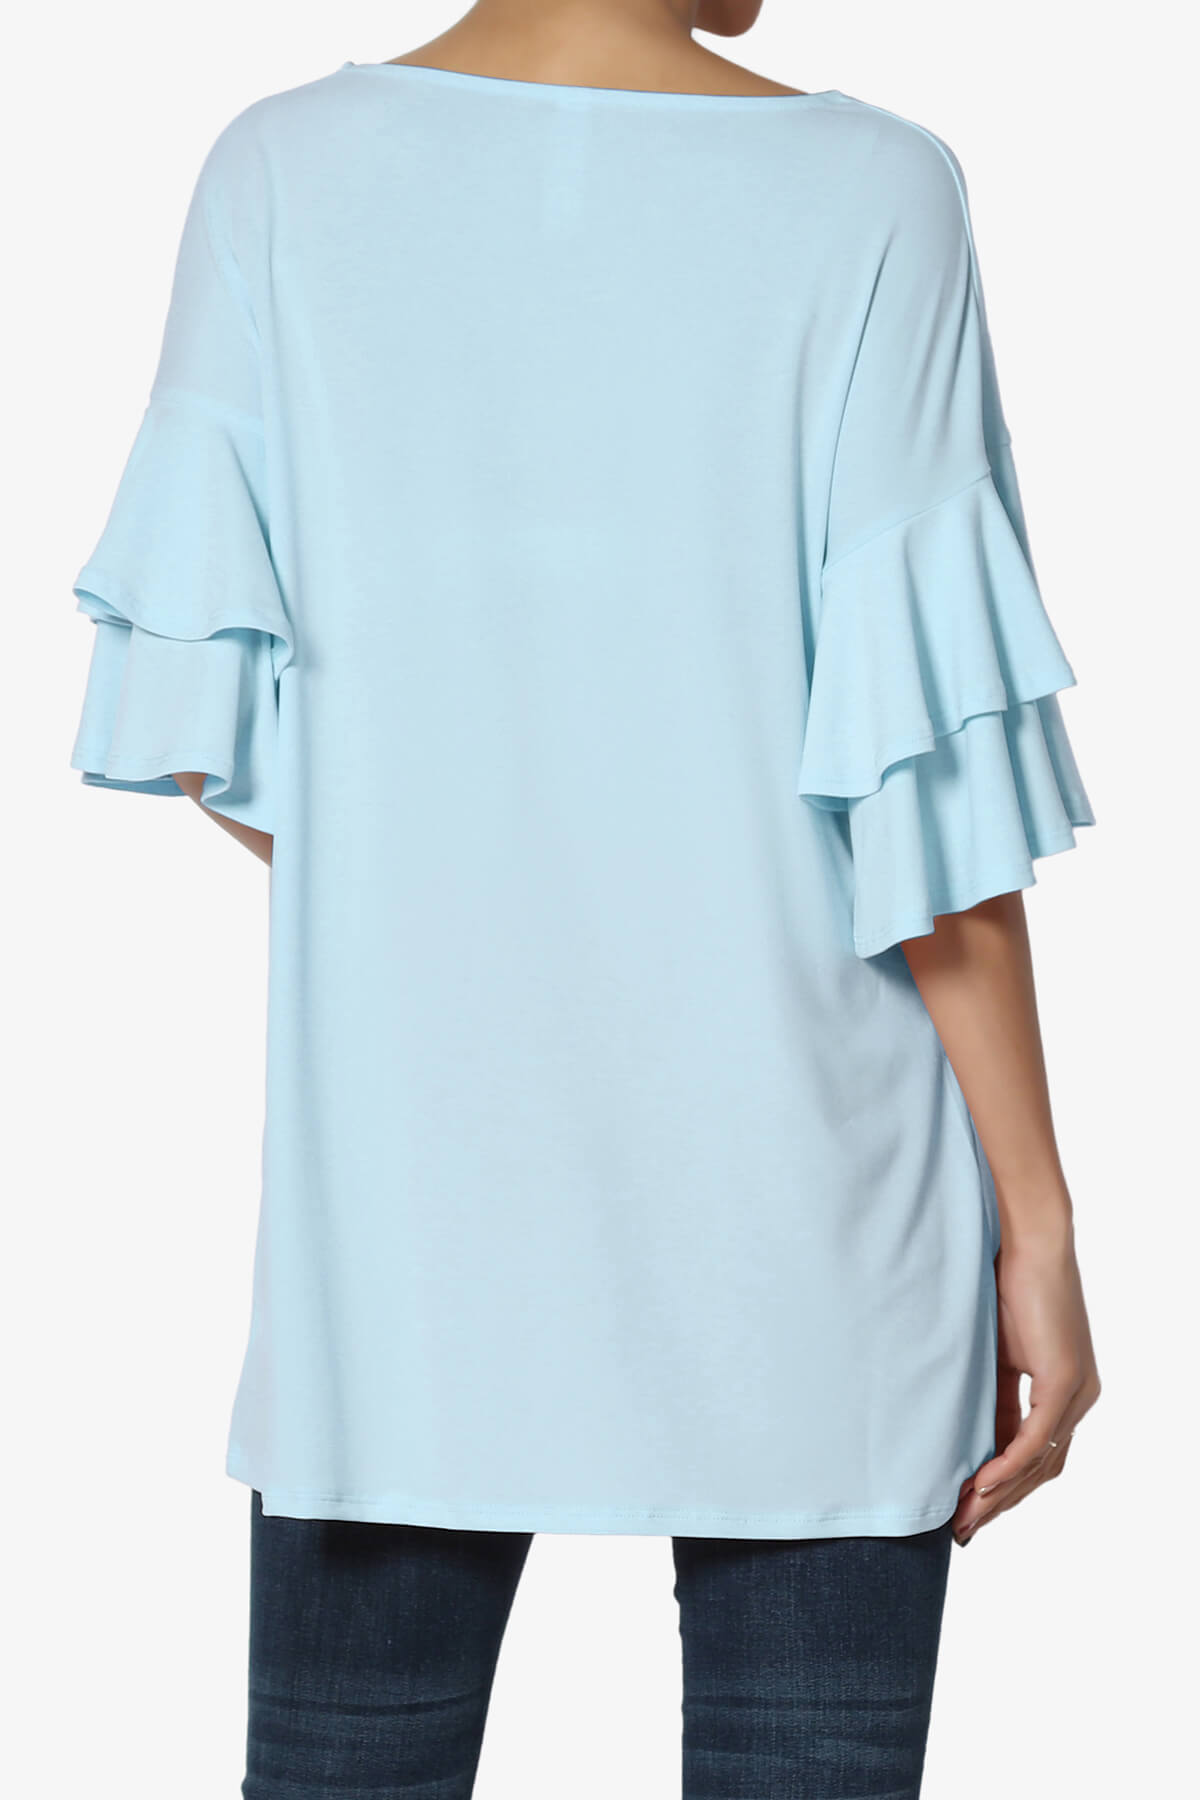 TheMogan Boat – Sleeve Loose Top Neck Bell Blouse T-Shirt Tiered 3/4 Casual Shirt